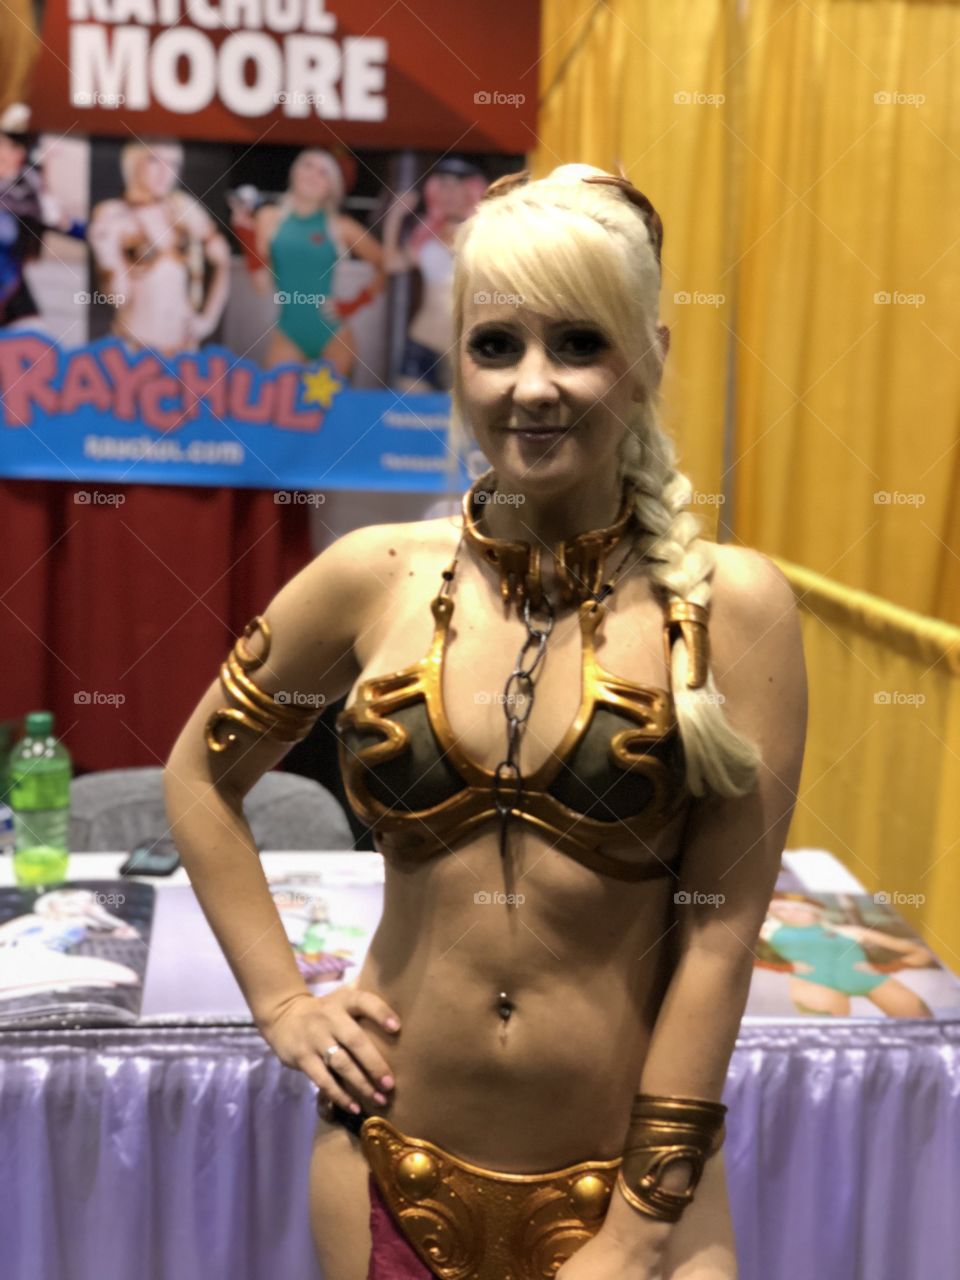 Raychul Moore as Slave Leia from Star Wars cosplay at Megacon 2018 in Orlando, Florida